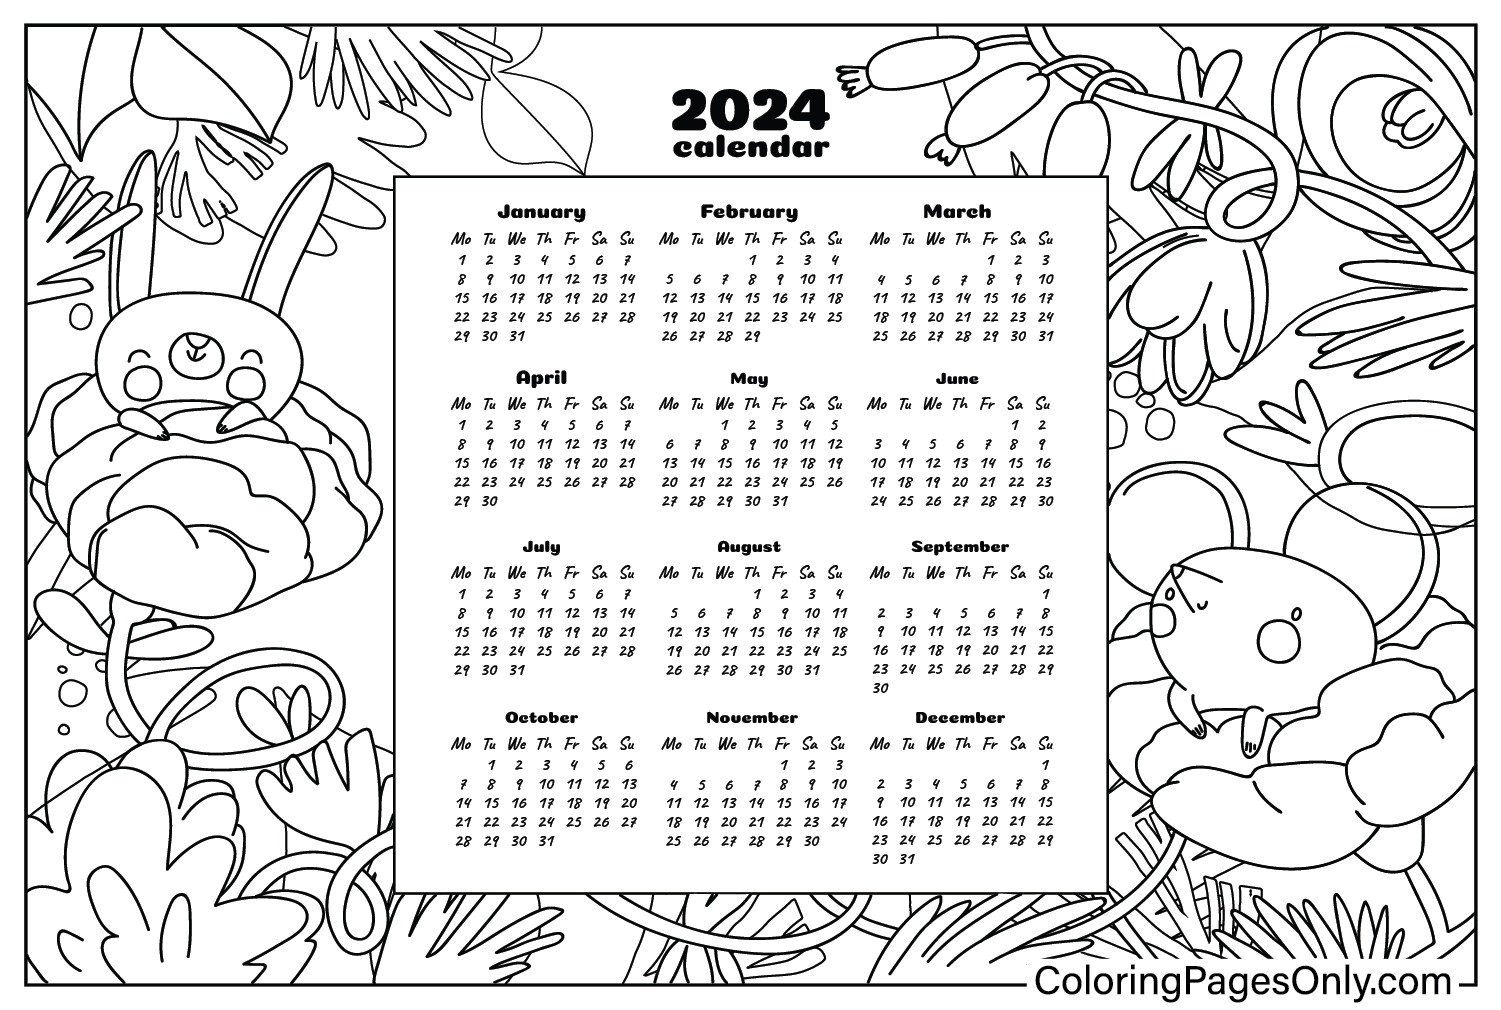 Calendar 2024 Coloring Page from